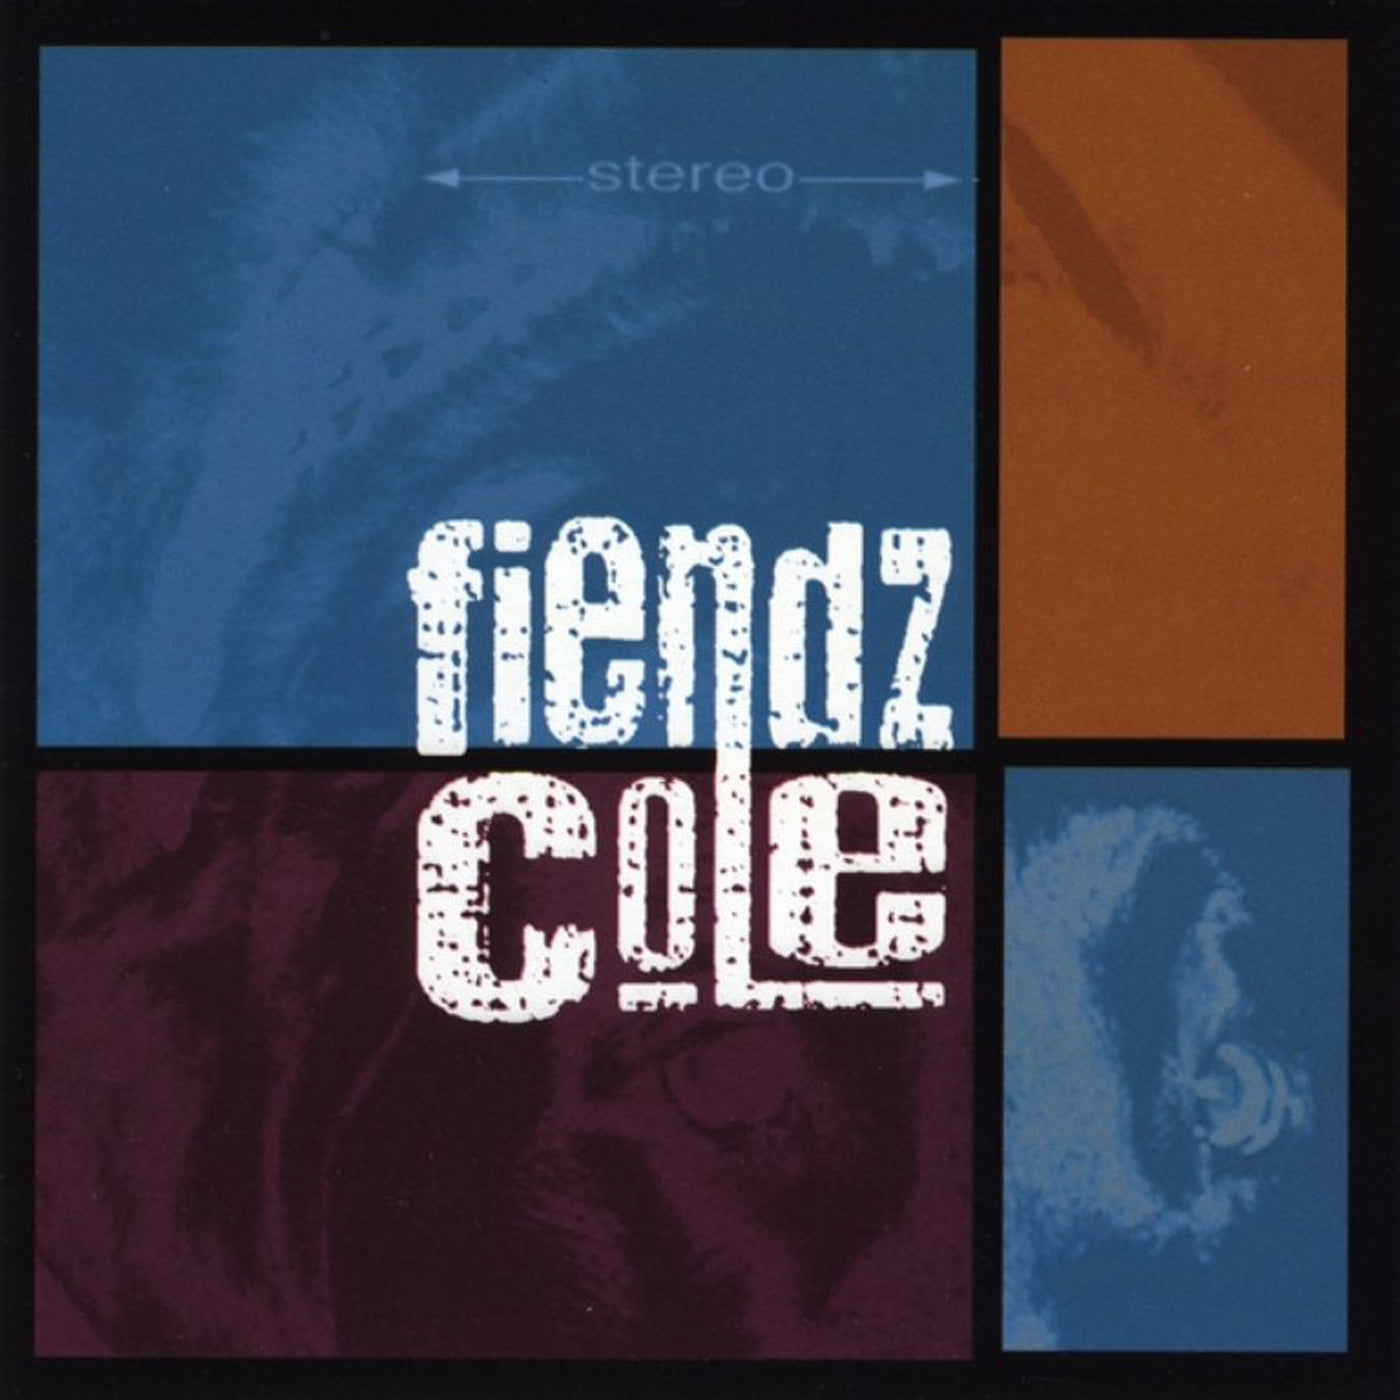 THE FIENDZ - "COLE" CD - INTO THE VOID Merch Co.